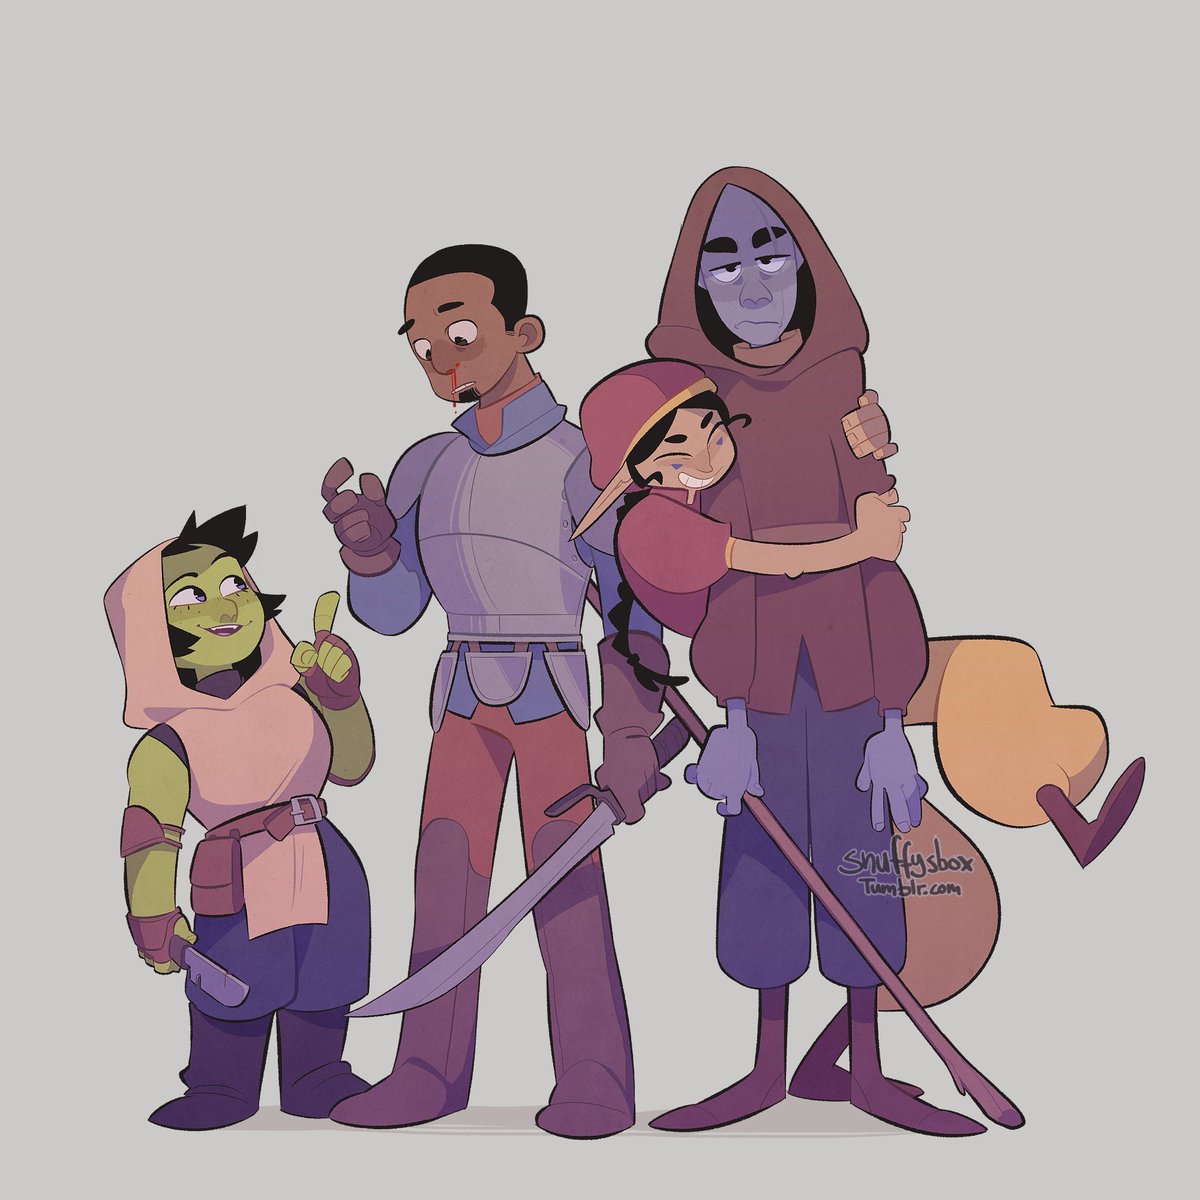 still fond of this unused DnD party I drew once upon a time 